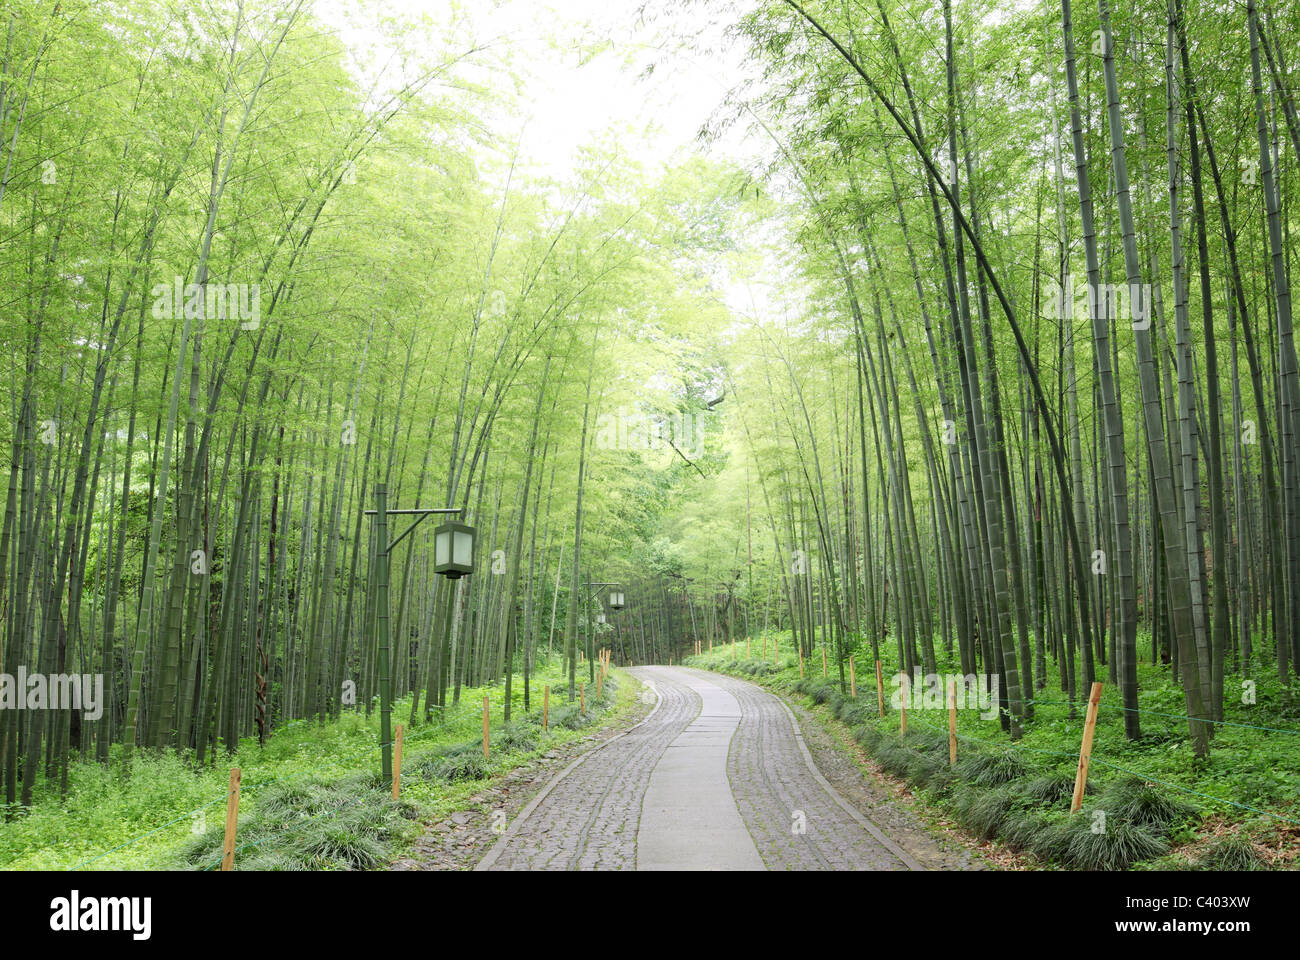 Green Bamboo Forest -- a path leads through a lush bamboo forest Stock Photo